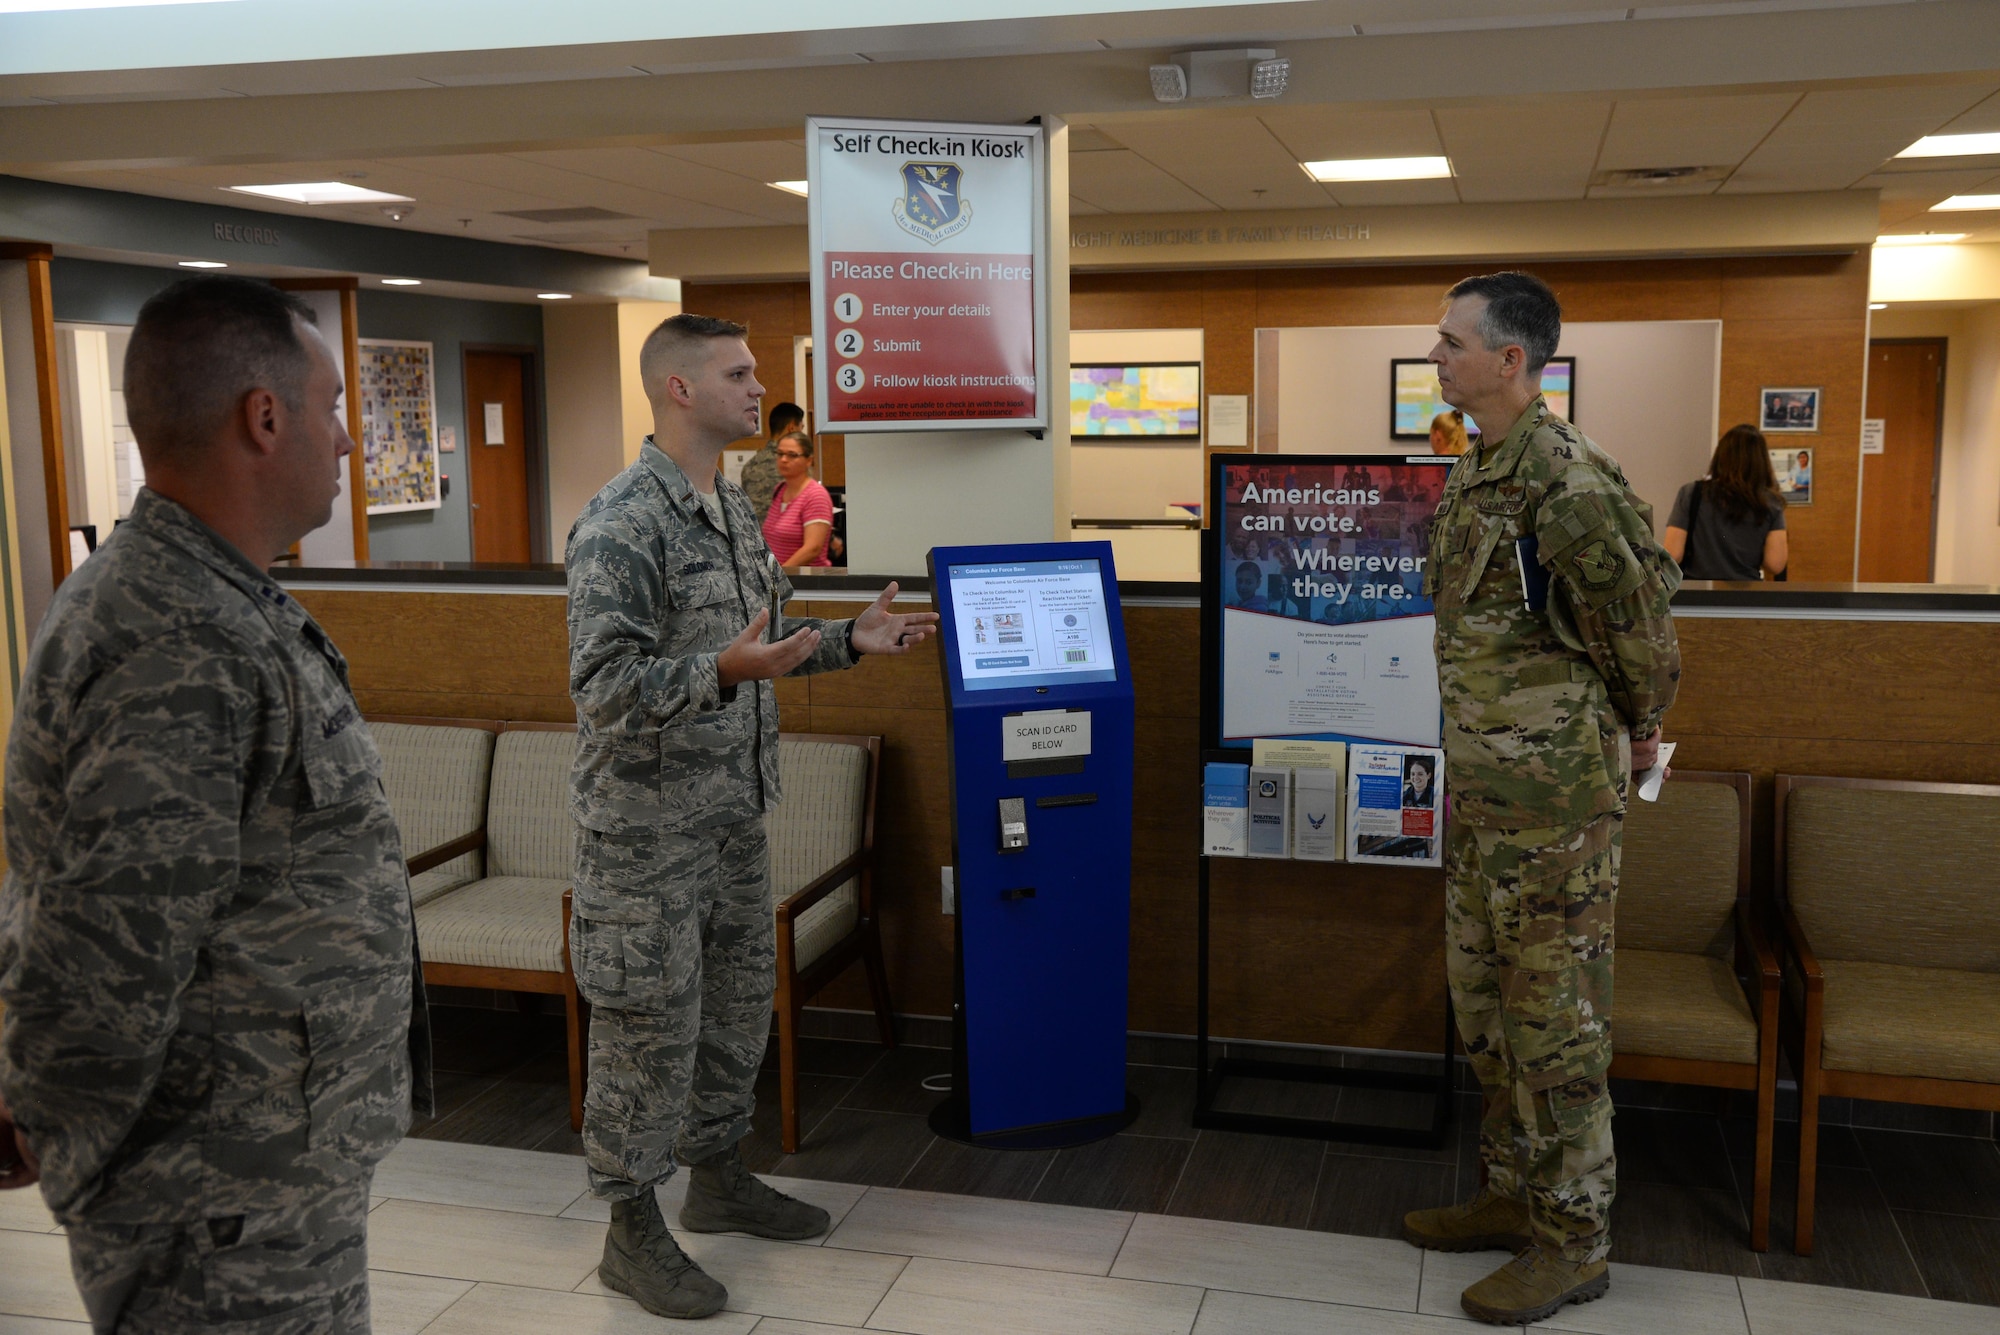 Maj. Gen. Craig Wills, 19th Air Force commander, and 2nd Lt. Brandon Solomon, 14th Healthcare Operations Squadron TOPA flight chief, speak about the benefits and time savings of the 14th Medical Group self-check in kiosk systems, Oct. 1, 2019, on Columbus Air Force Base, Miss. During Wills’ visit, he spoke with key members of different squadrons about innovative ways they are making the base and its systems better. (U.S. Air Force photo by Airman 1st Class Jake Jacobsen)